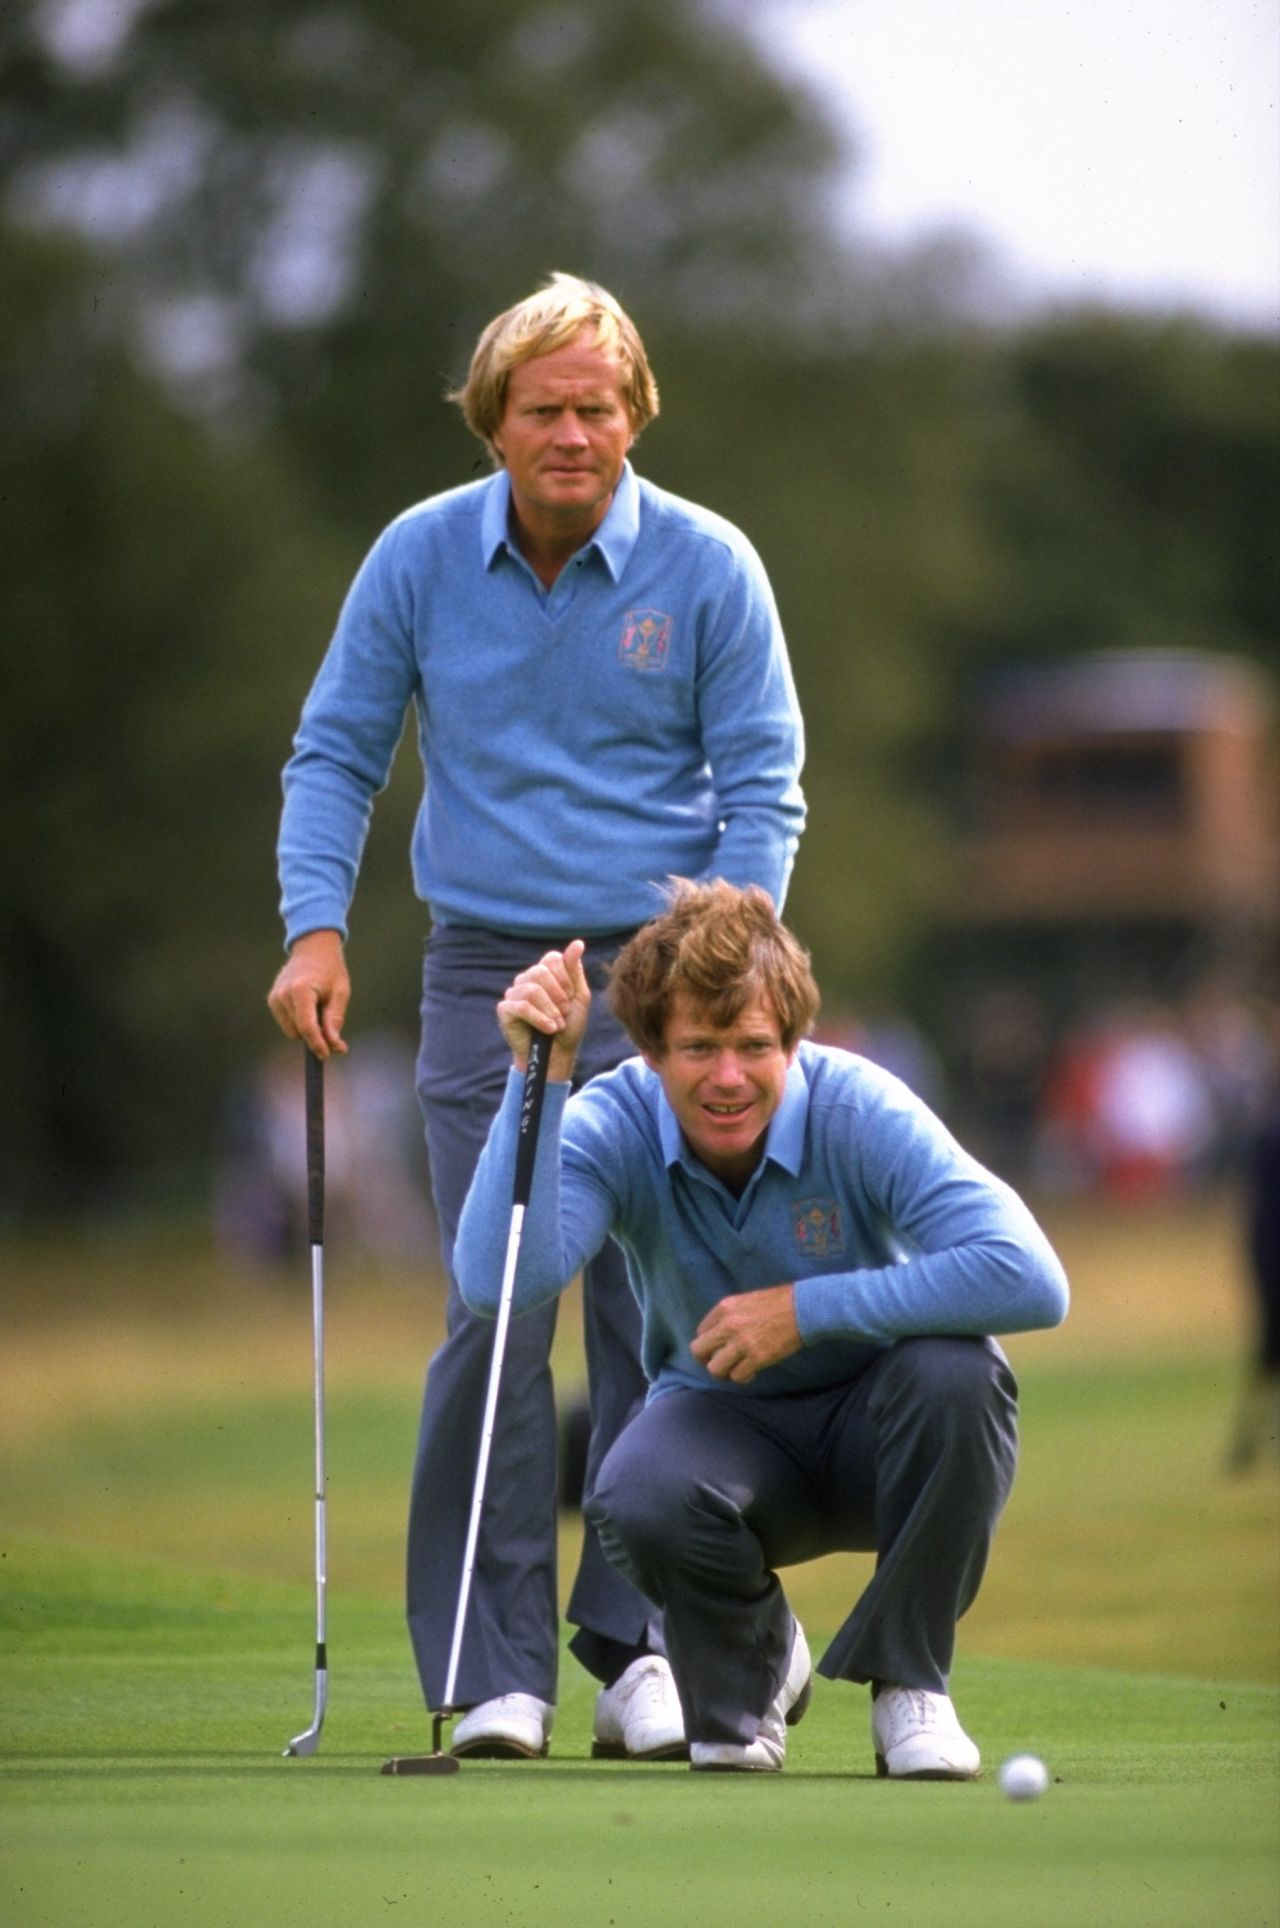 Watson's second appearance in 1981 also came on English shores, this time at Walton Heath in Surrey. He teamed up with 18-time major winner Jack Nicklaus and they comfortably won all three matches.